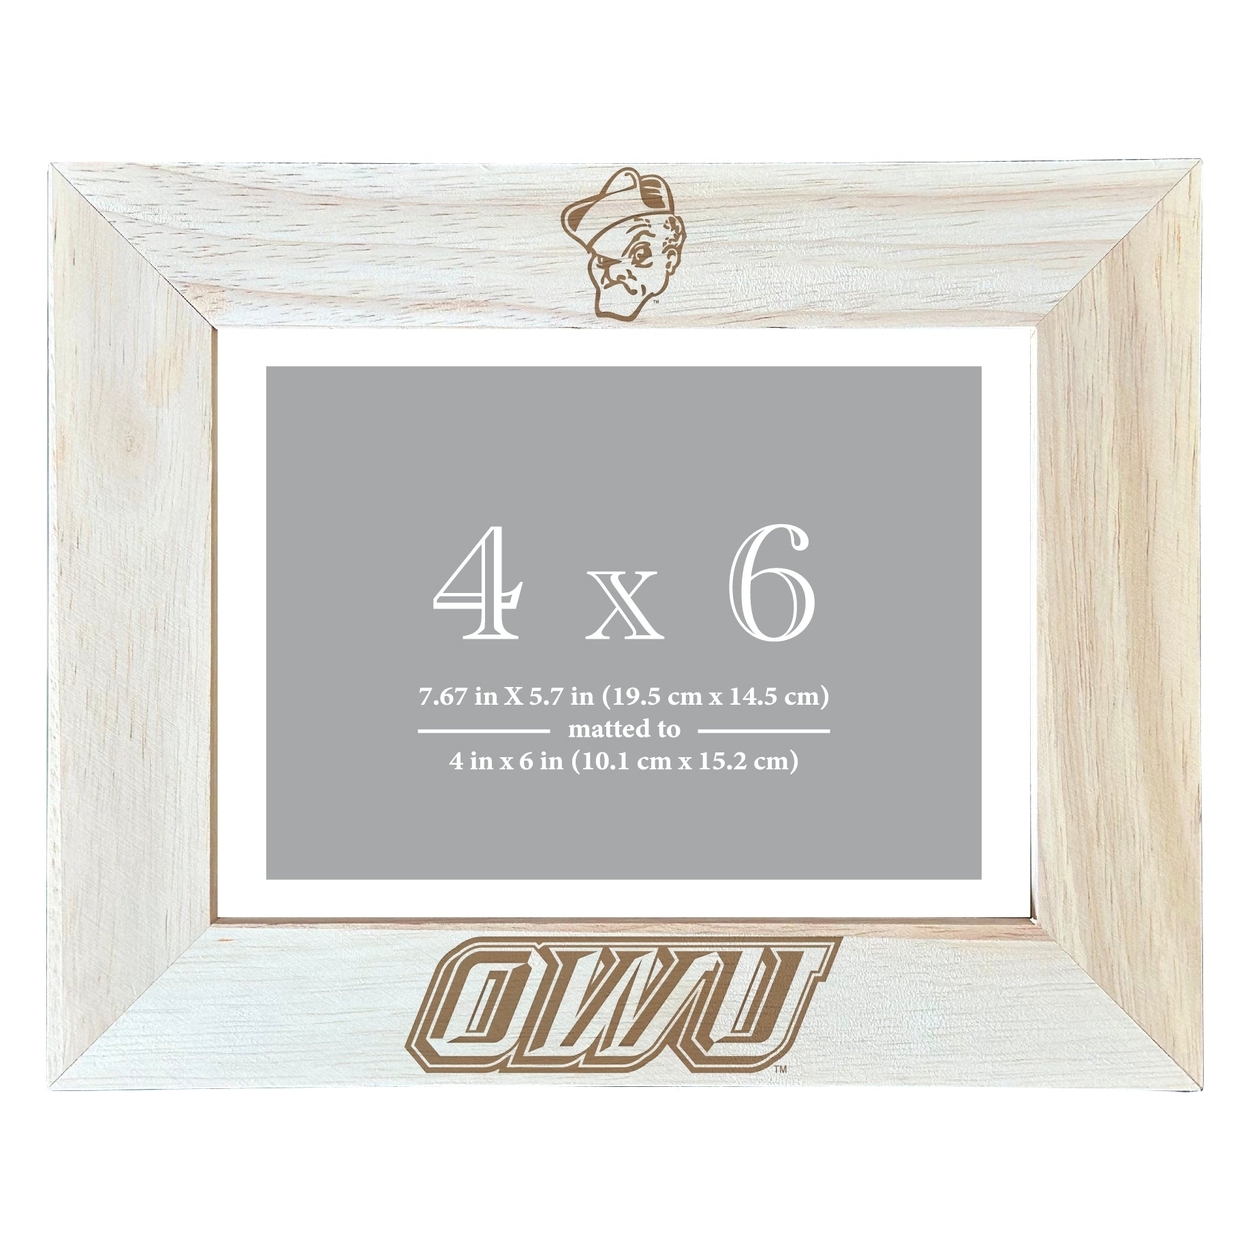 Ohio Wesleyan University Wooden Photo Frame Matted To 4 X 6 Inch - Etched